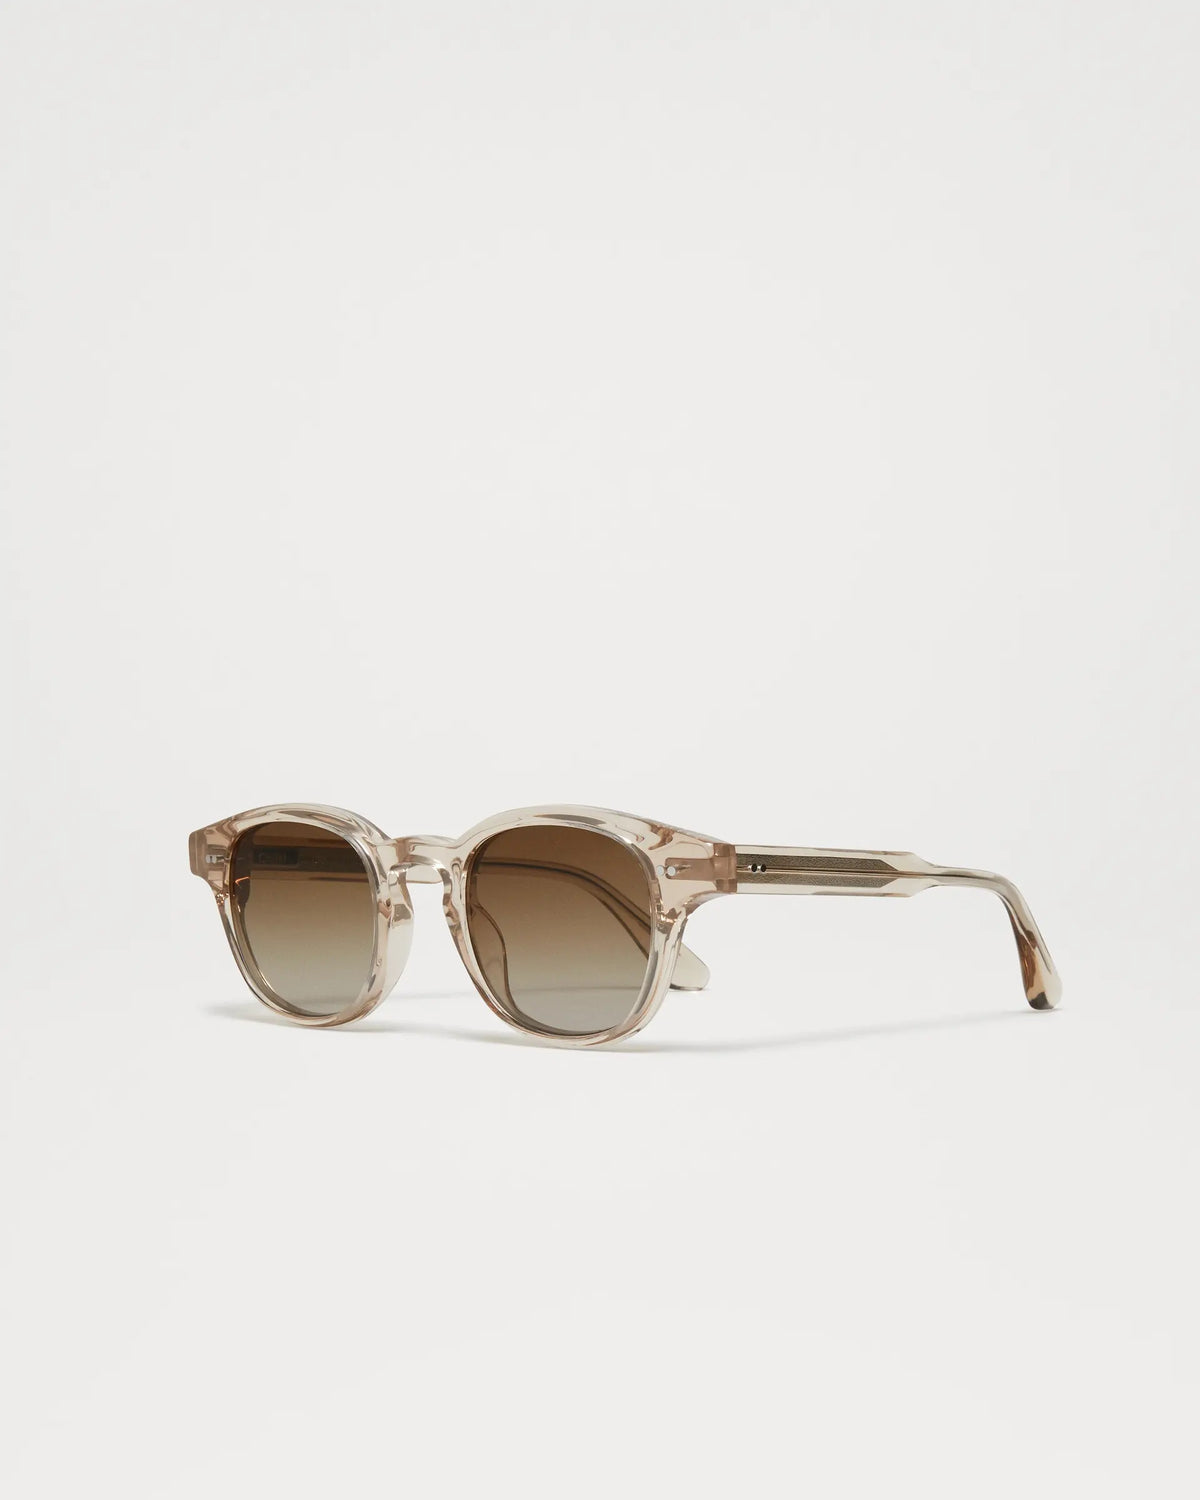 Ecru Italian acetate sunglasses with a slightly rounded shape and light brown lenses